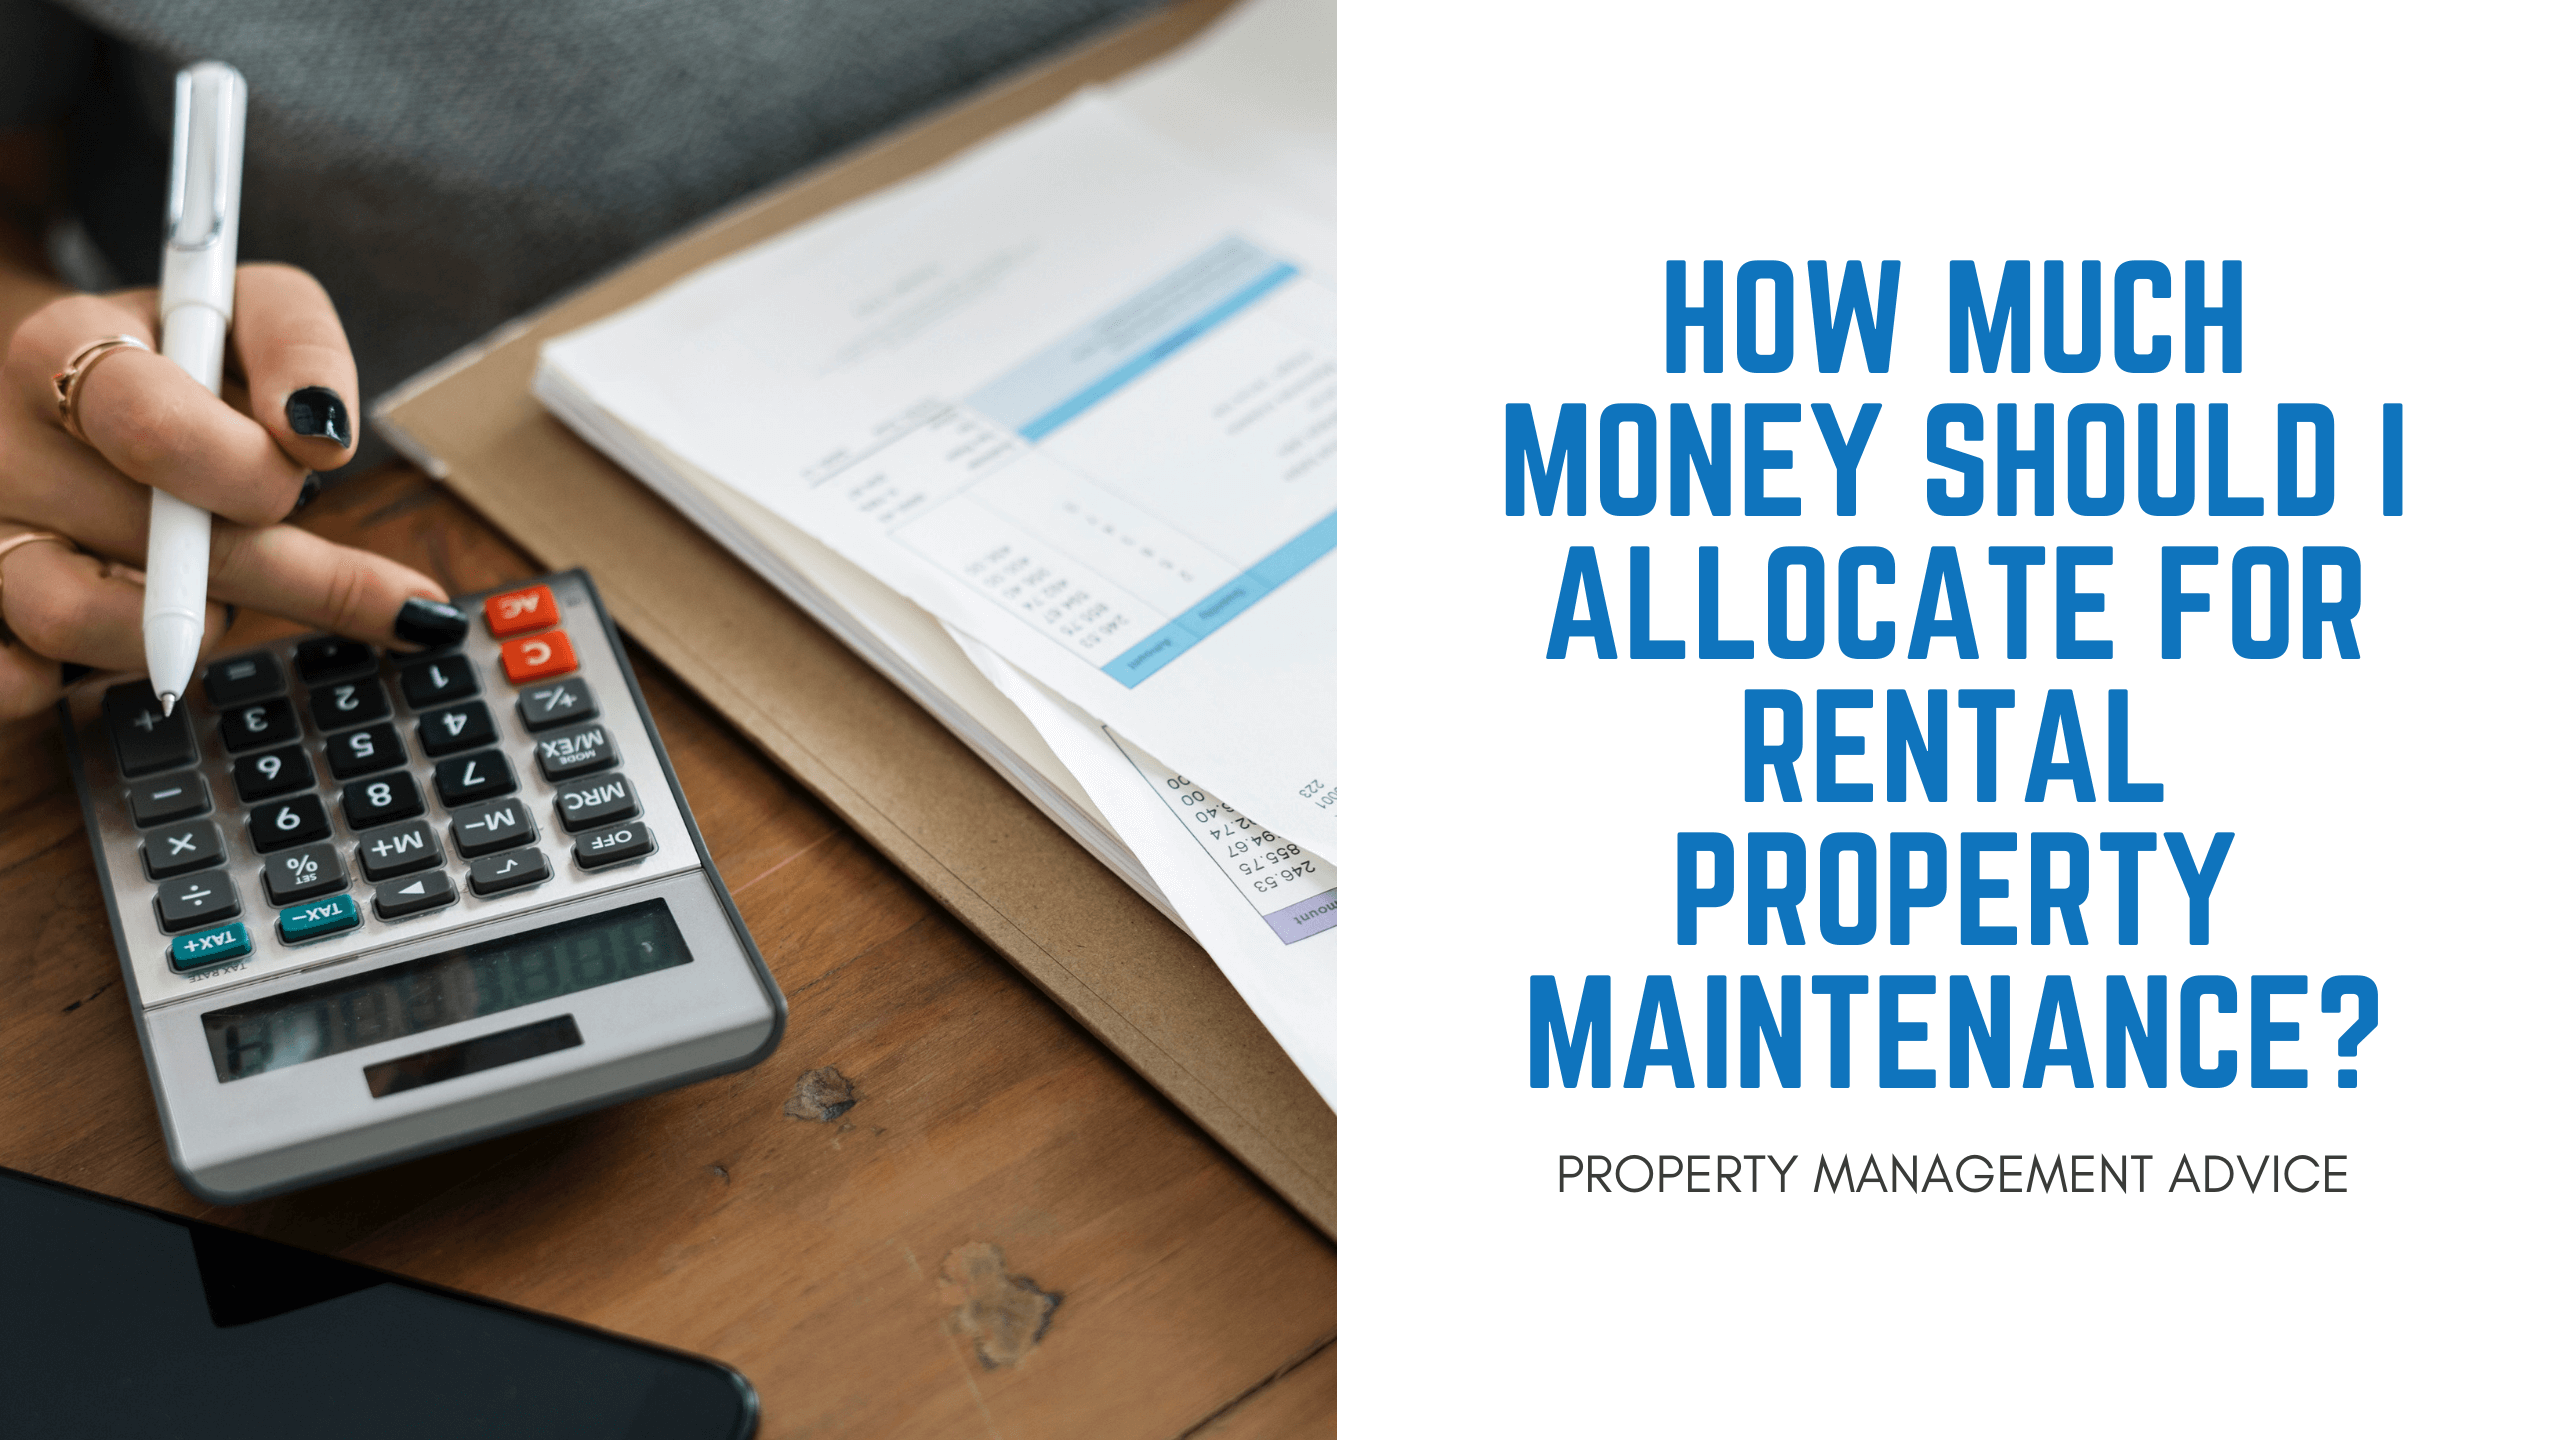 How Much Money Should I Allocate for Rental Property Maintenance? | Kansas City Property Management Advice